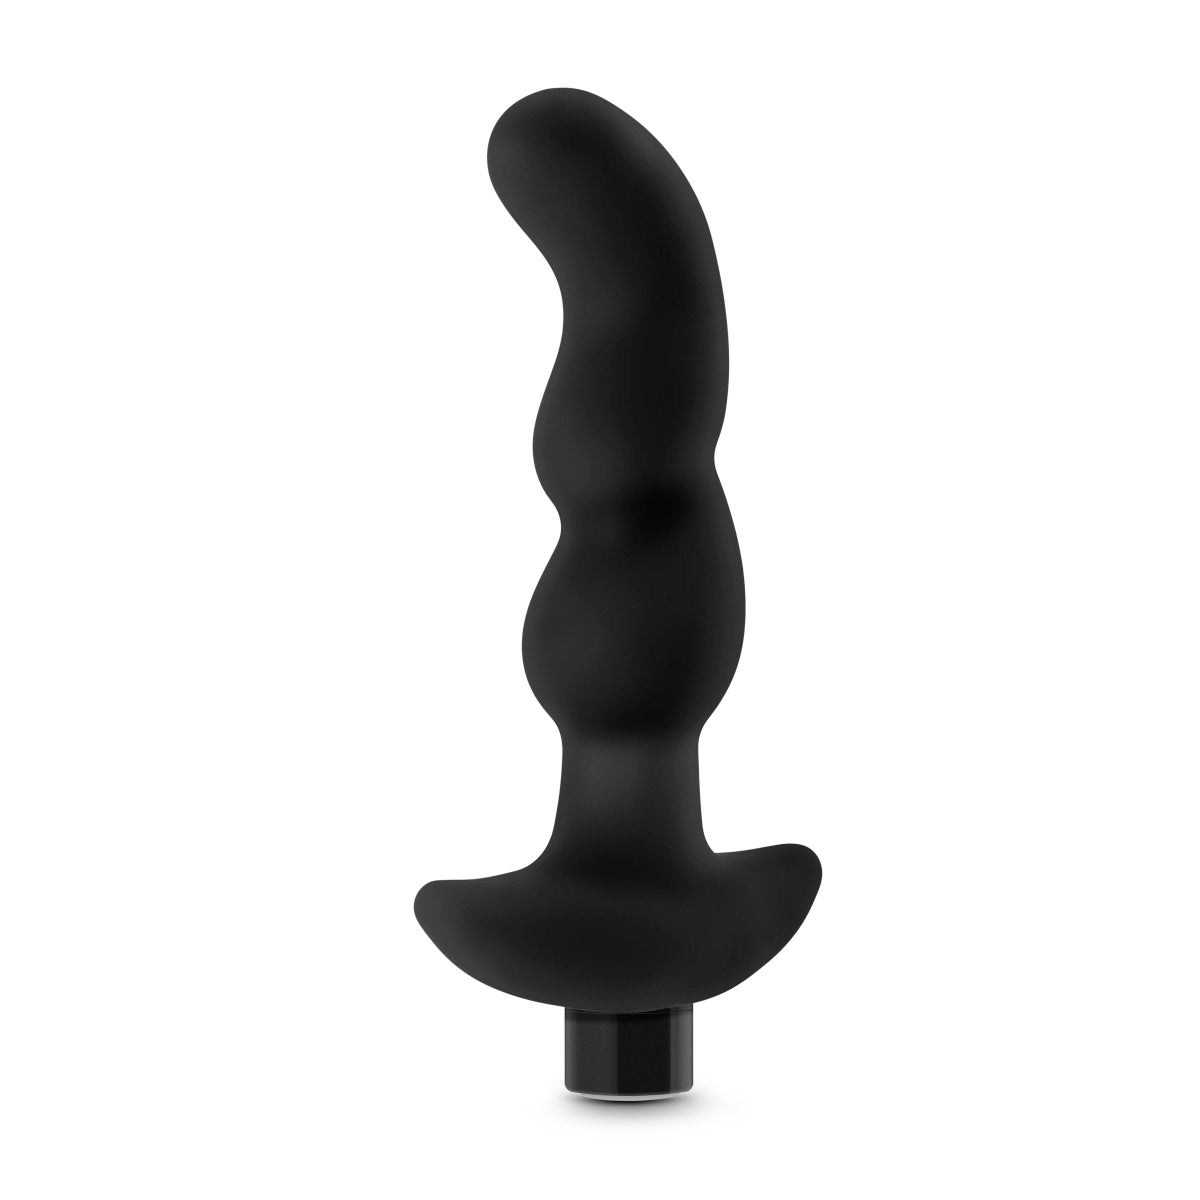 Anal Adventures Platinum Prostate Massager 03  Black 6-Inch Vibrating Rechargeable Anal Plug